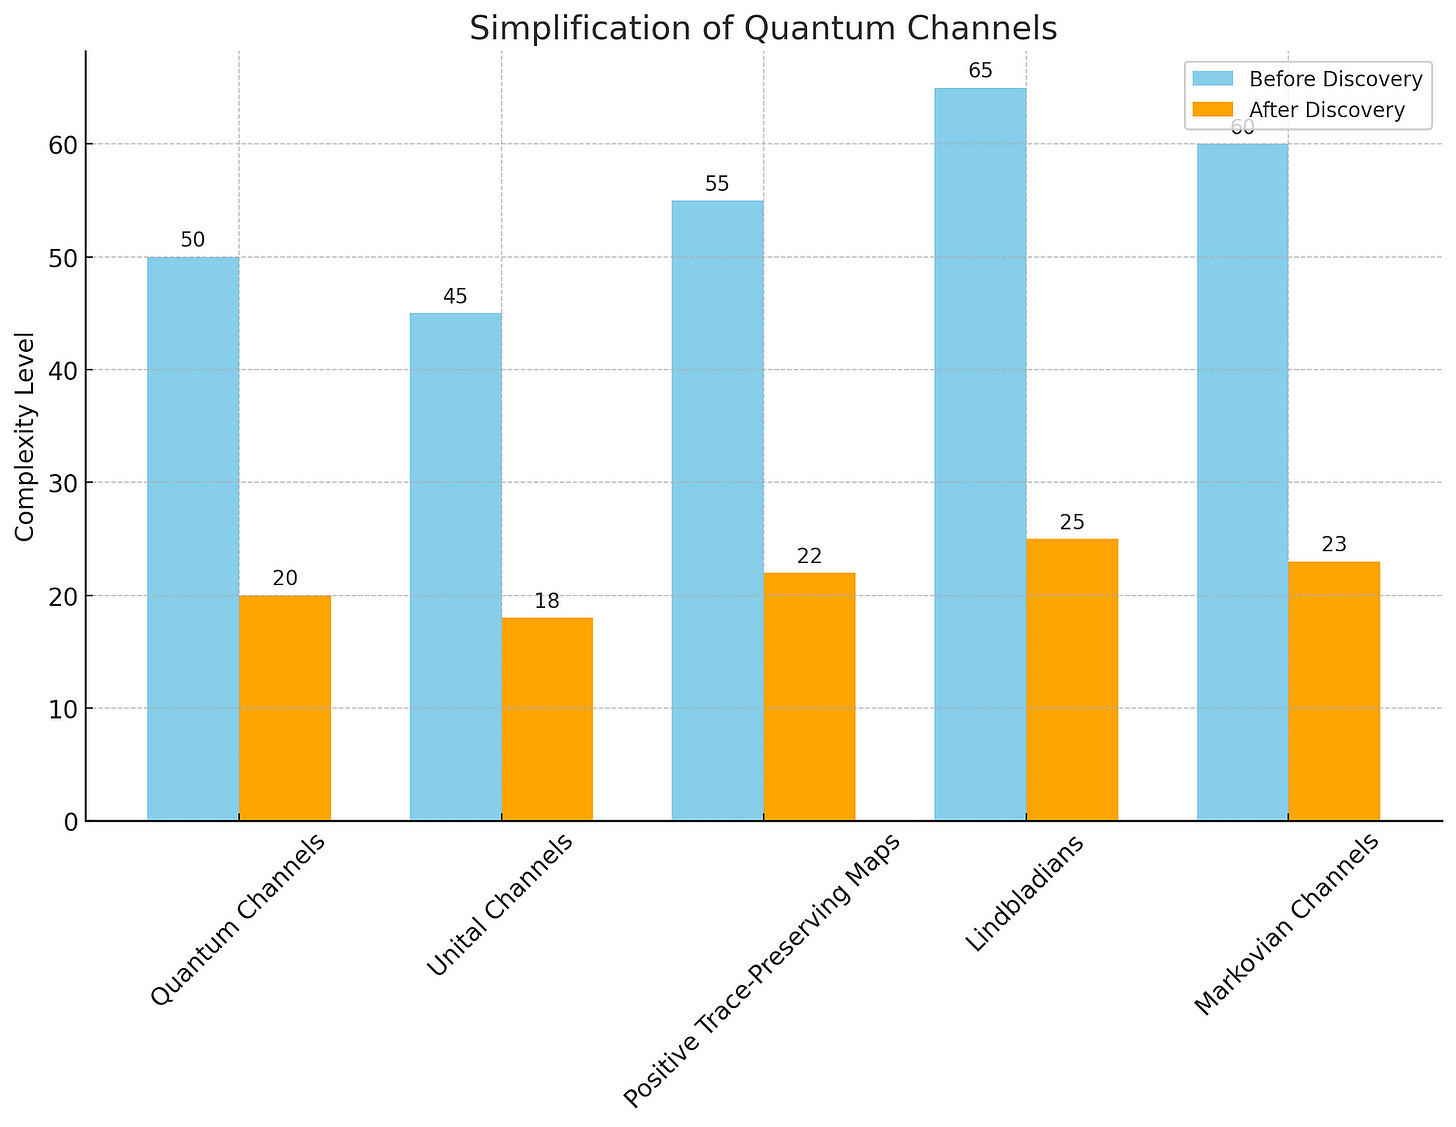 A bar graph showing the reduction in complexity levels for various types of quantum channels after the discovery. Each category of quantum channel is represented by two bars, one for before the discovery (in sky blue) and one for after (in orange), illustrating a significant decrease in complexity across all types.